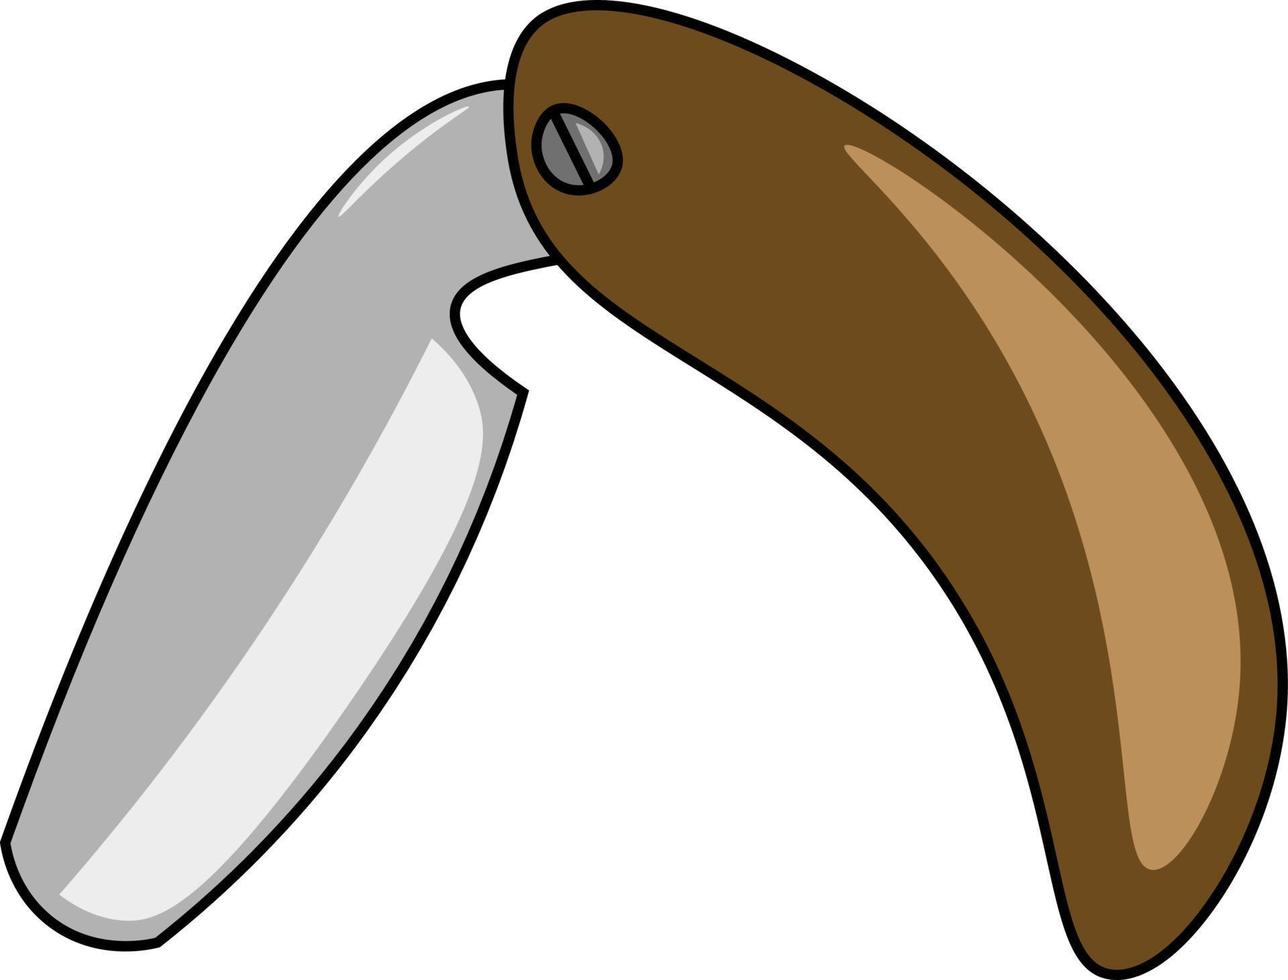 A small shaving knife, vector or color illustration.